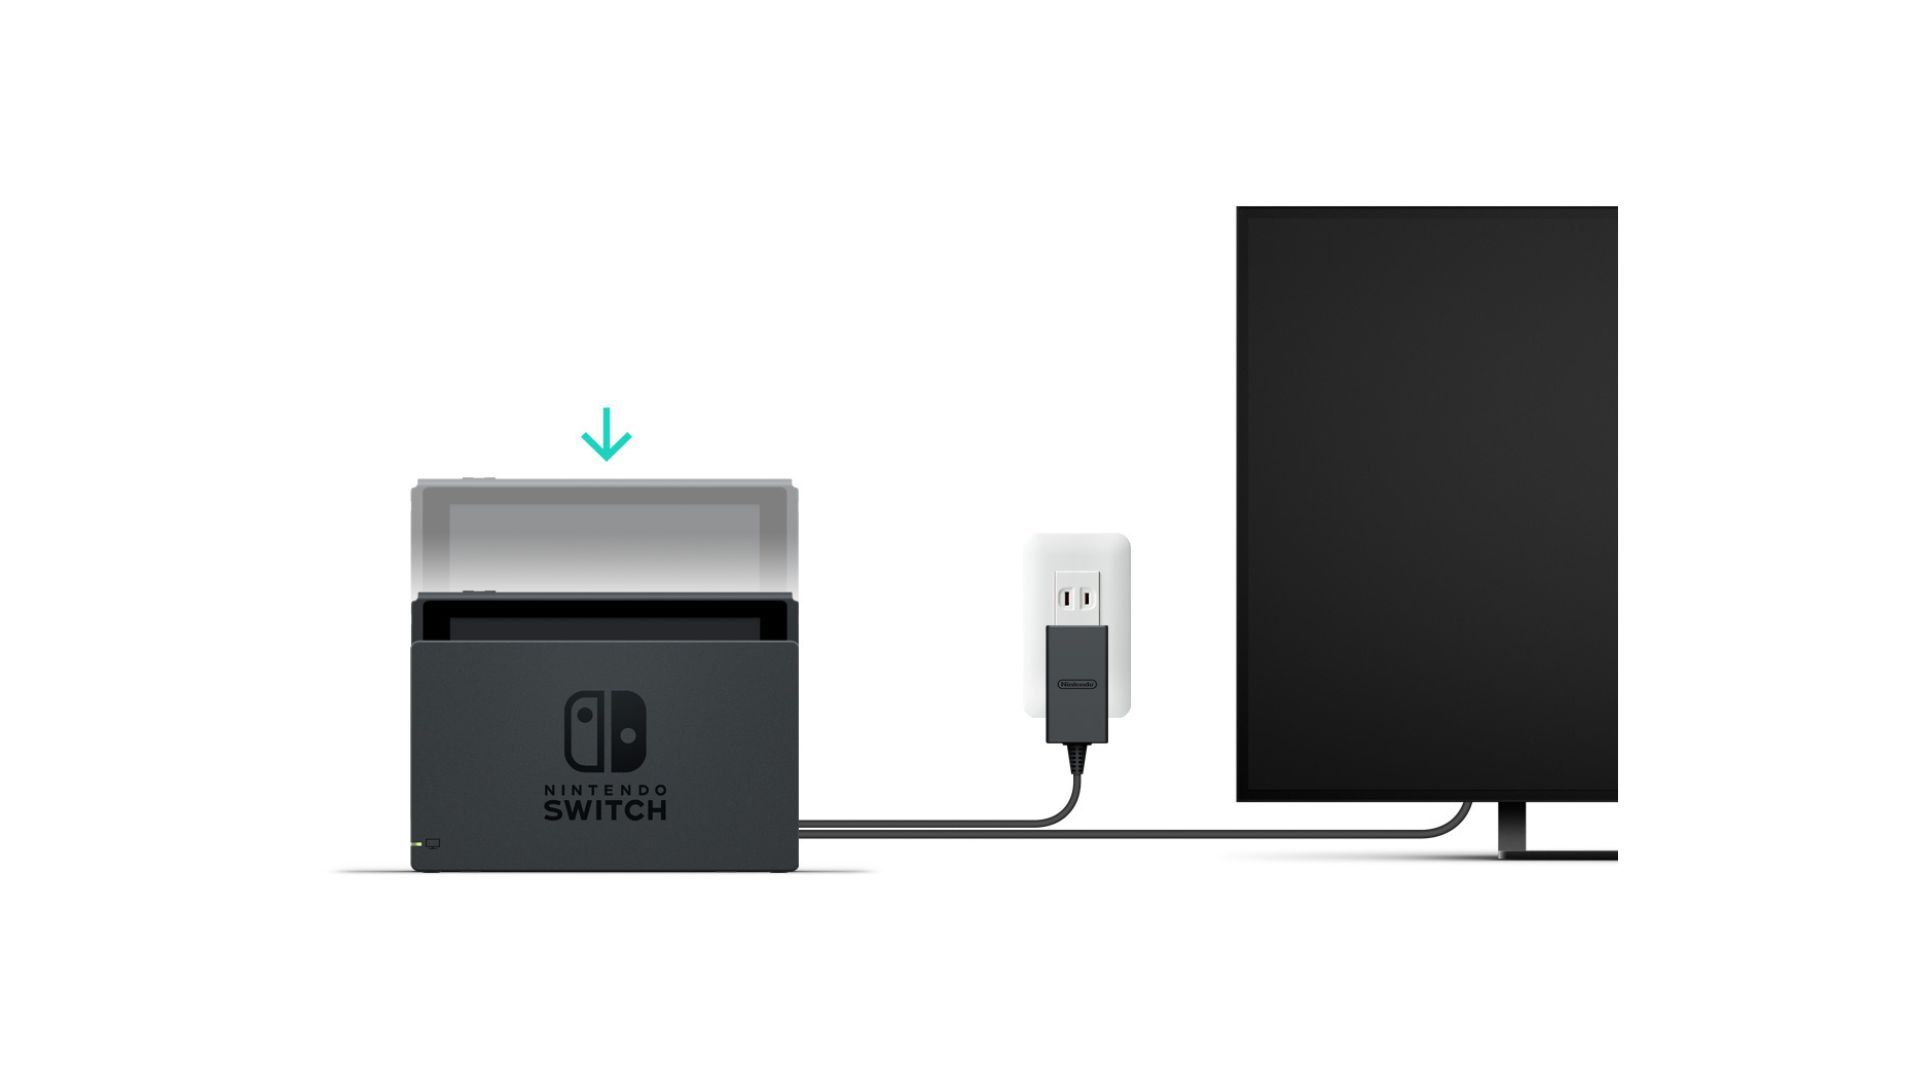 How to connect Nintendo Switch to TV